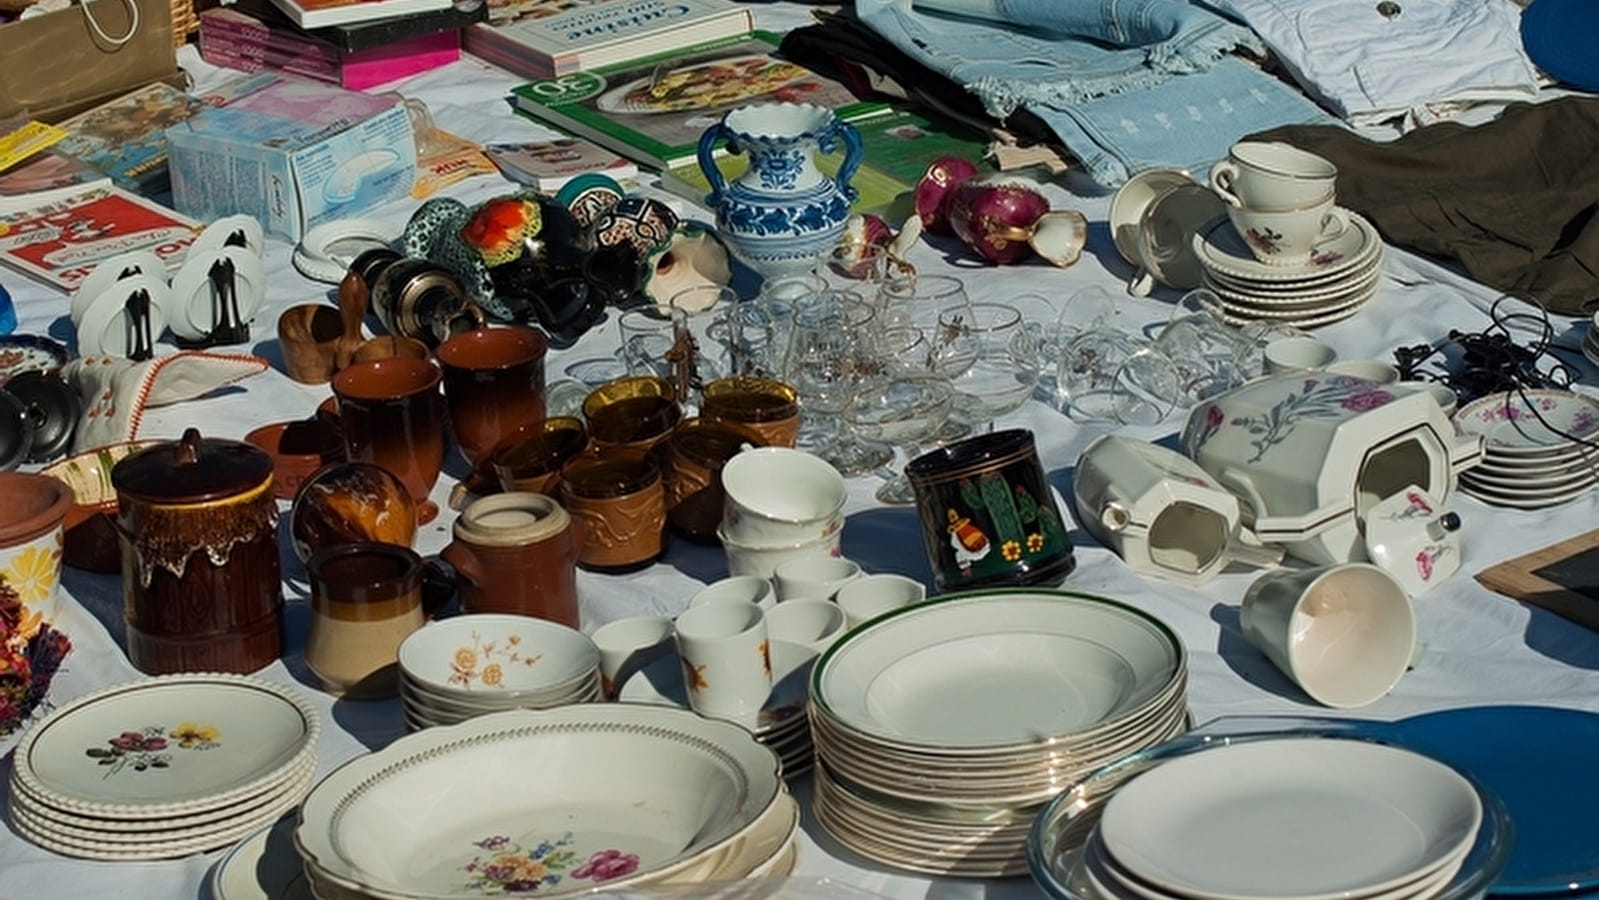 Garage sales, second-hand goods and antiques